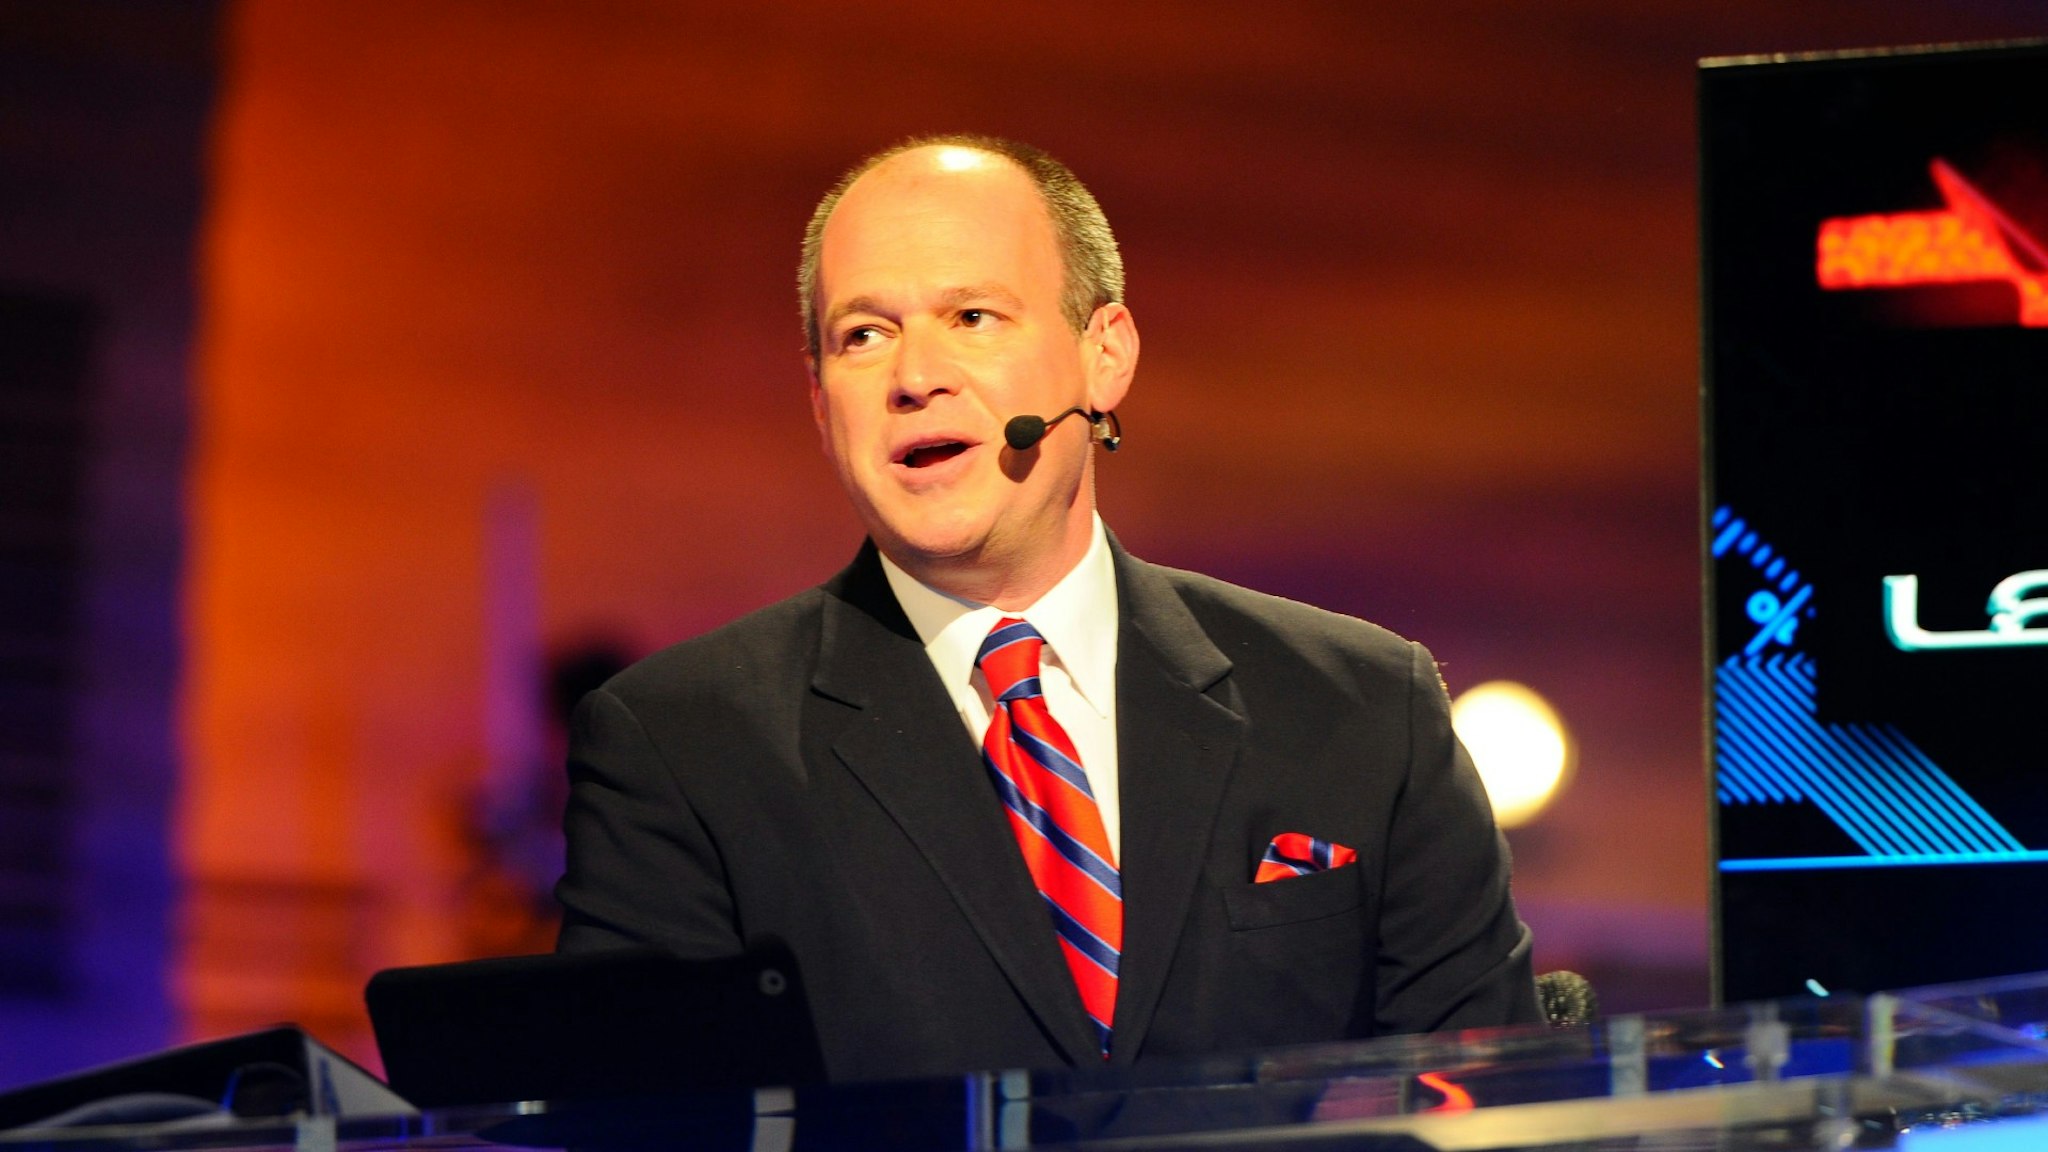 Rich Eisen of the NFL Network broadcasts prior to the start of the first round of the NFL Draft at Radio City Music Hall in Manhattan, NY.